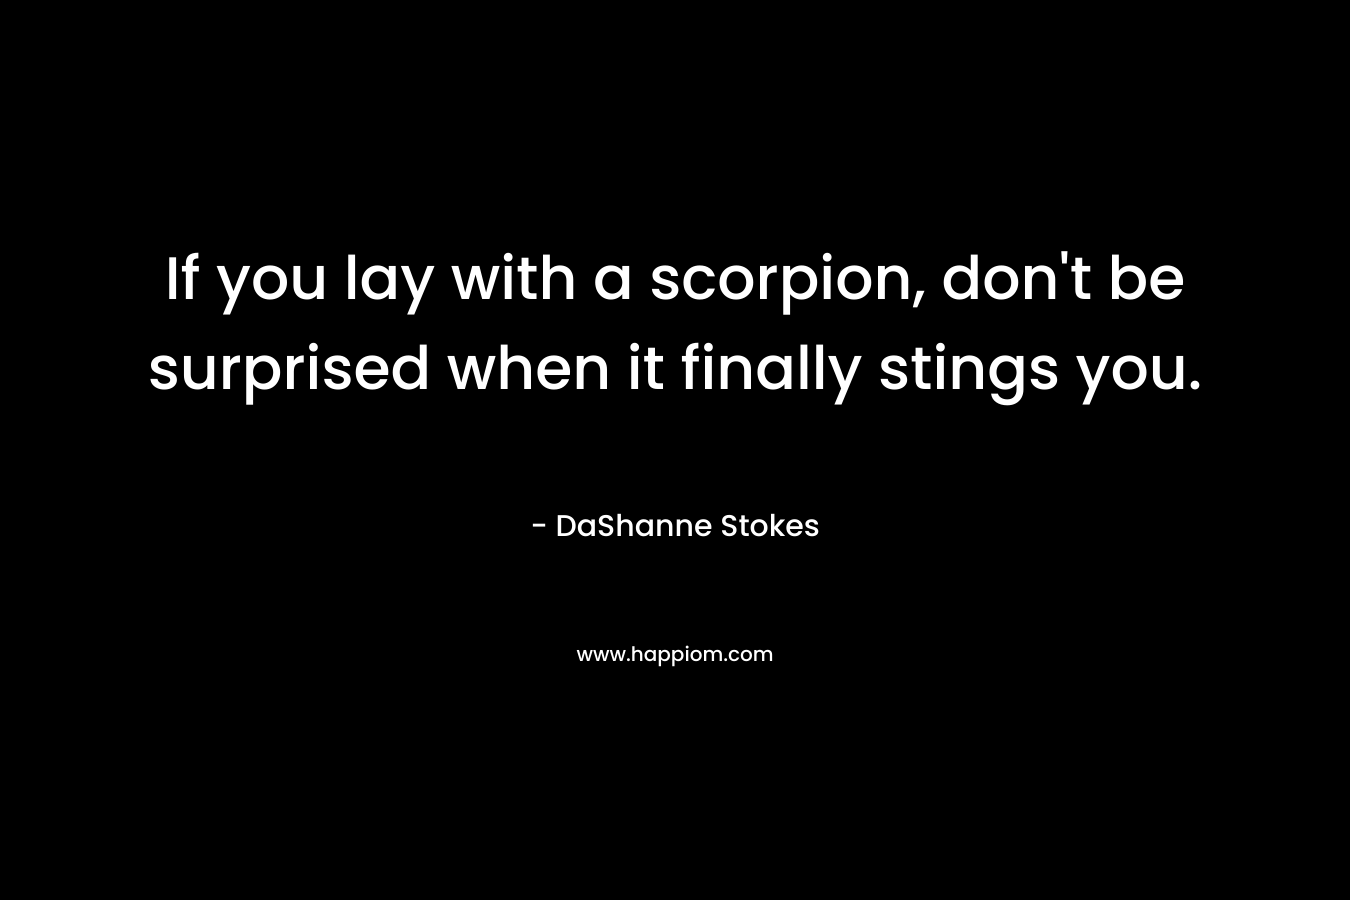 If you lay with a scorpion, don't be surprised when it finally stings you.